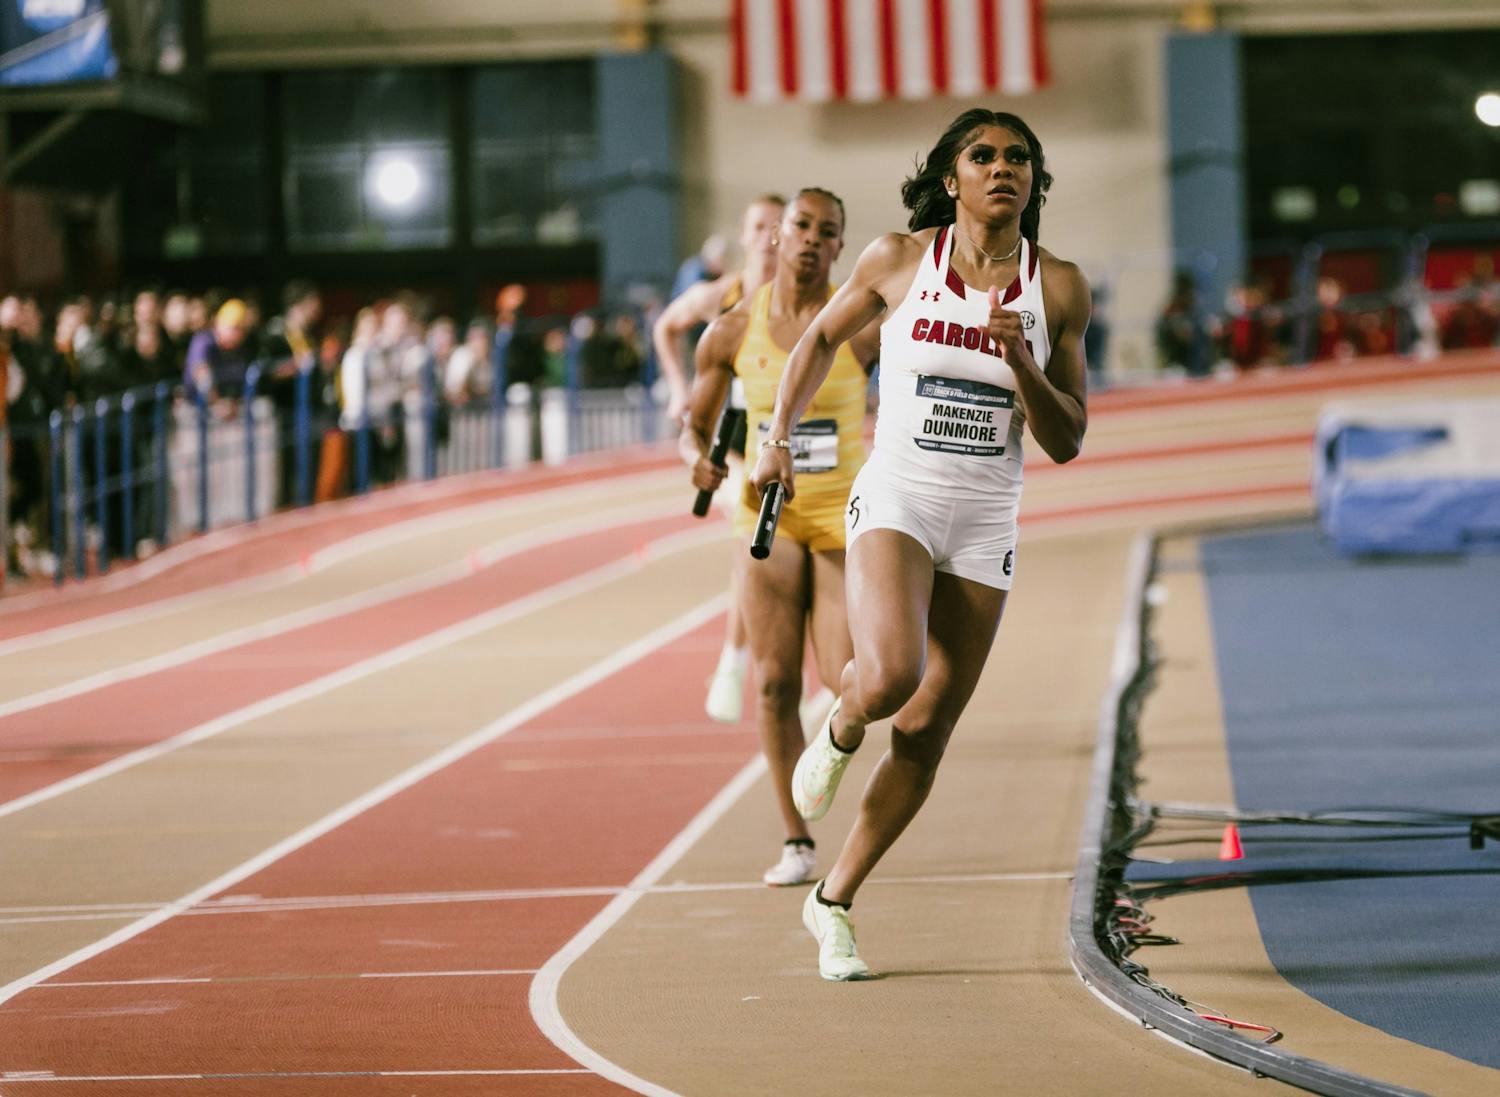 Senior sprinter Makenzie Dunmore races along with USC Track &amp; Field while competing at the 2022 D1 Indoor Nationals at the CrossPlex in Birmingham, A.L., on March 12, 2022.